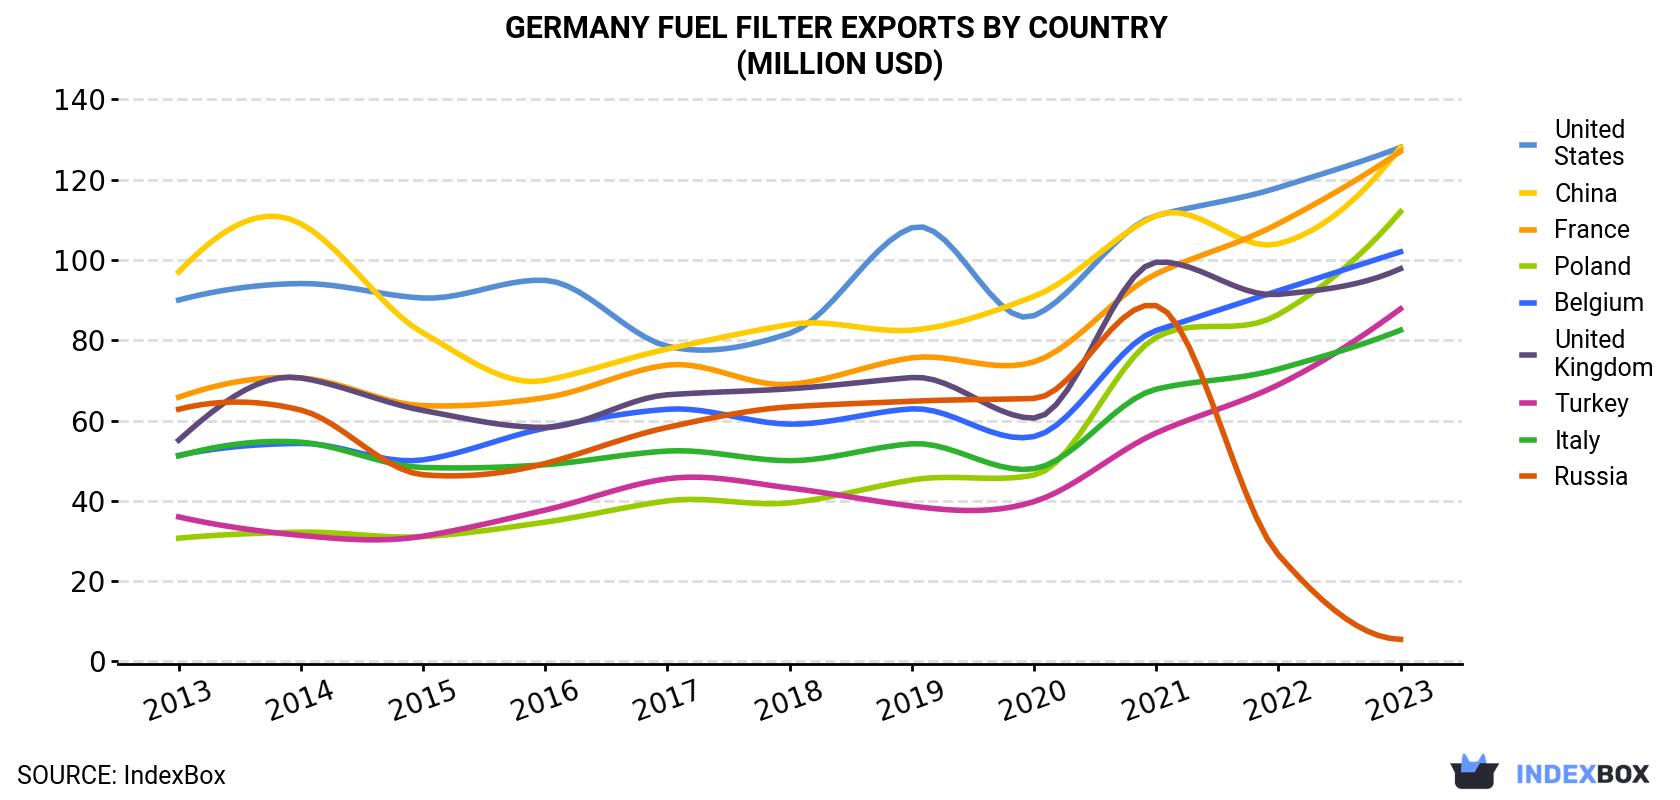 Germany Fuel Filter Exports By Country (Million USD)